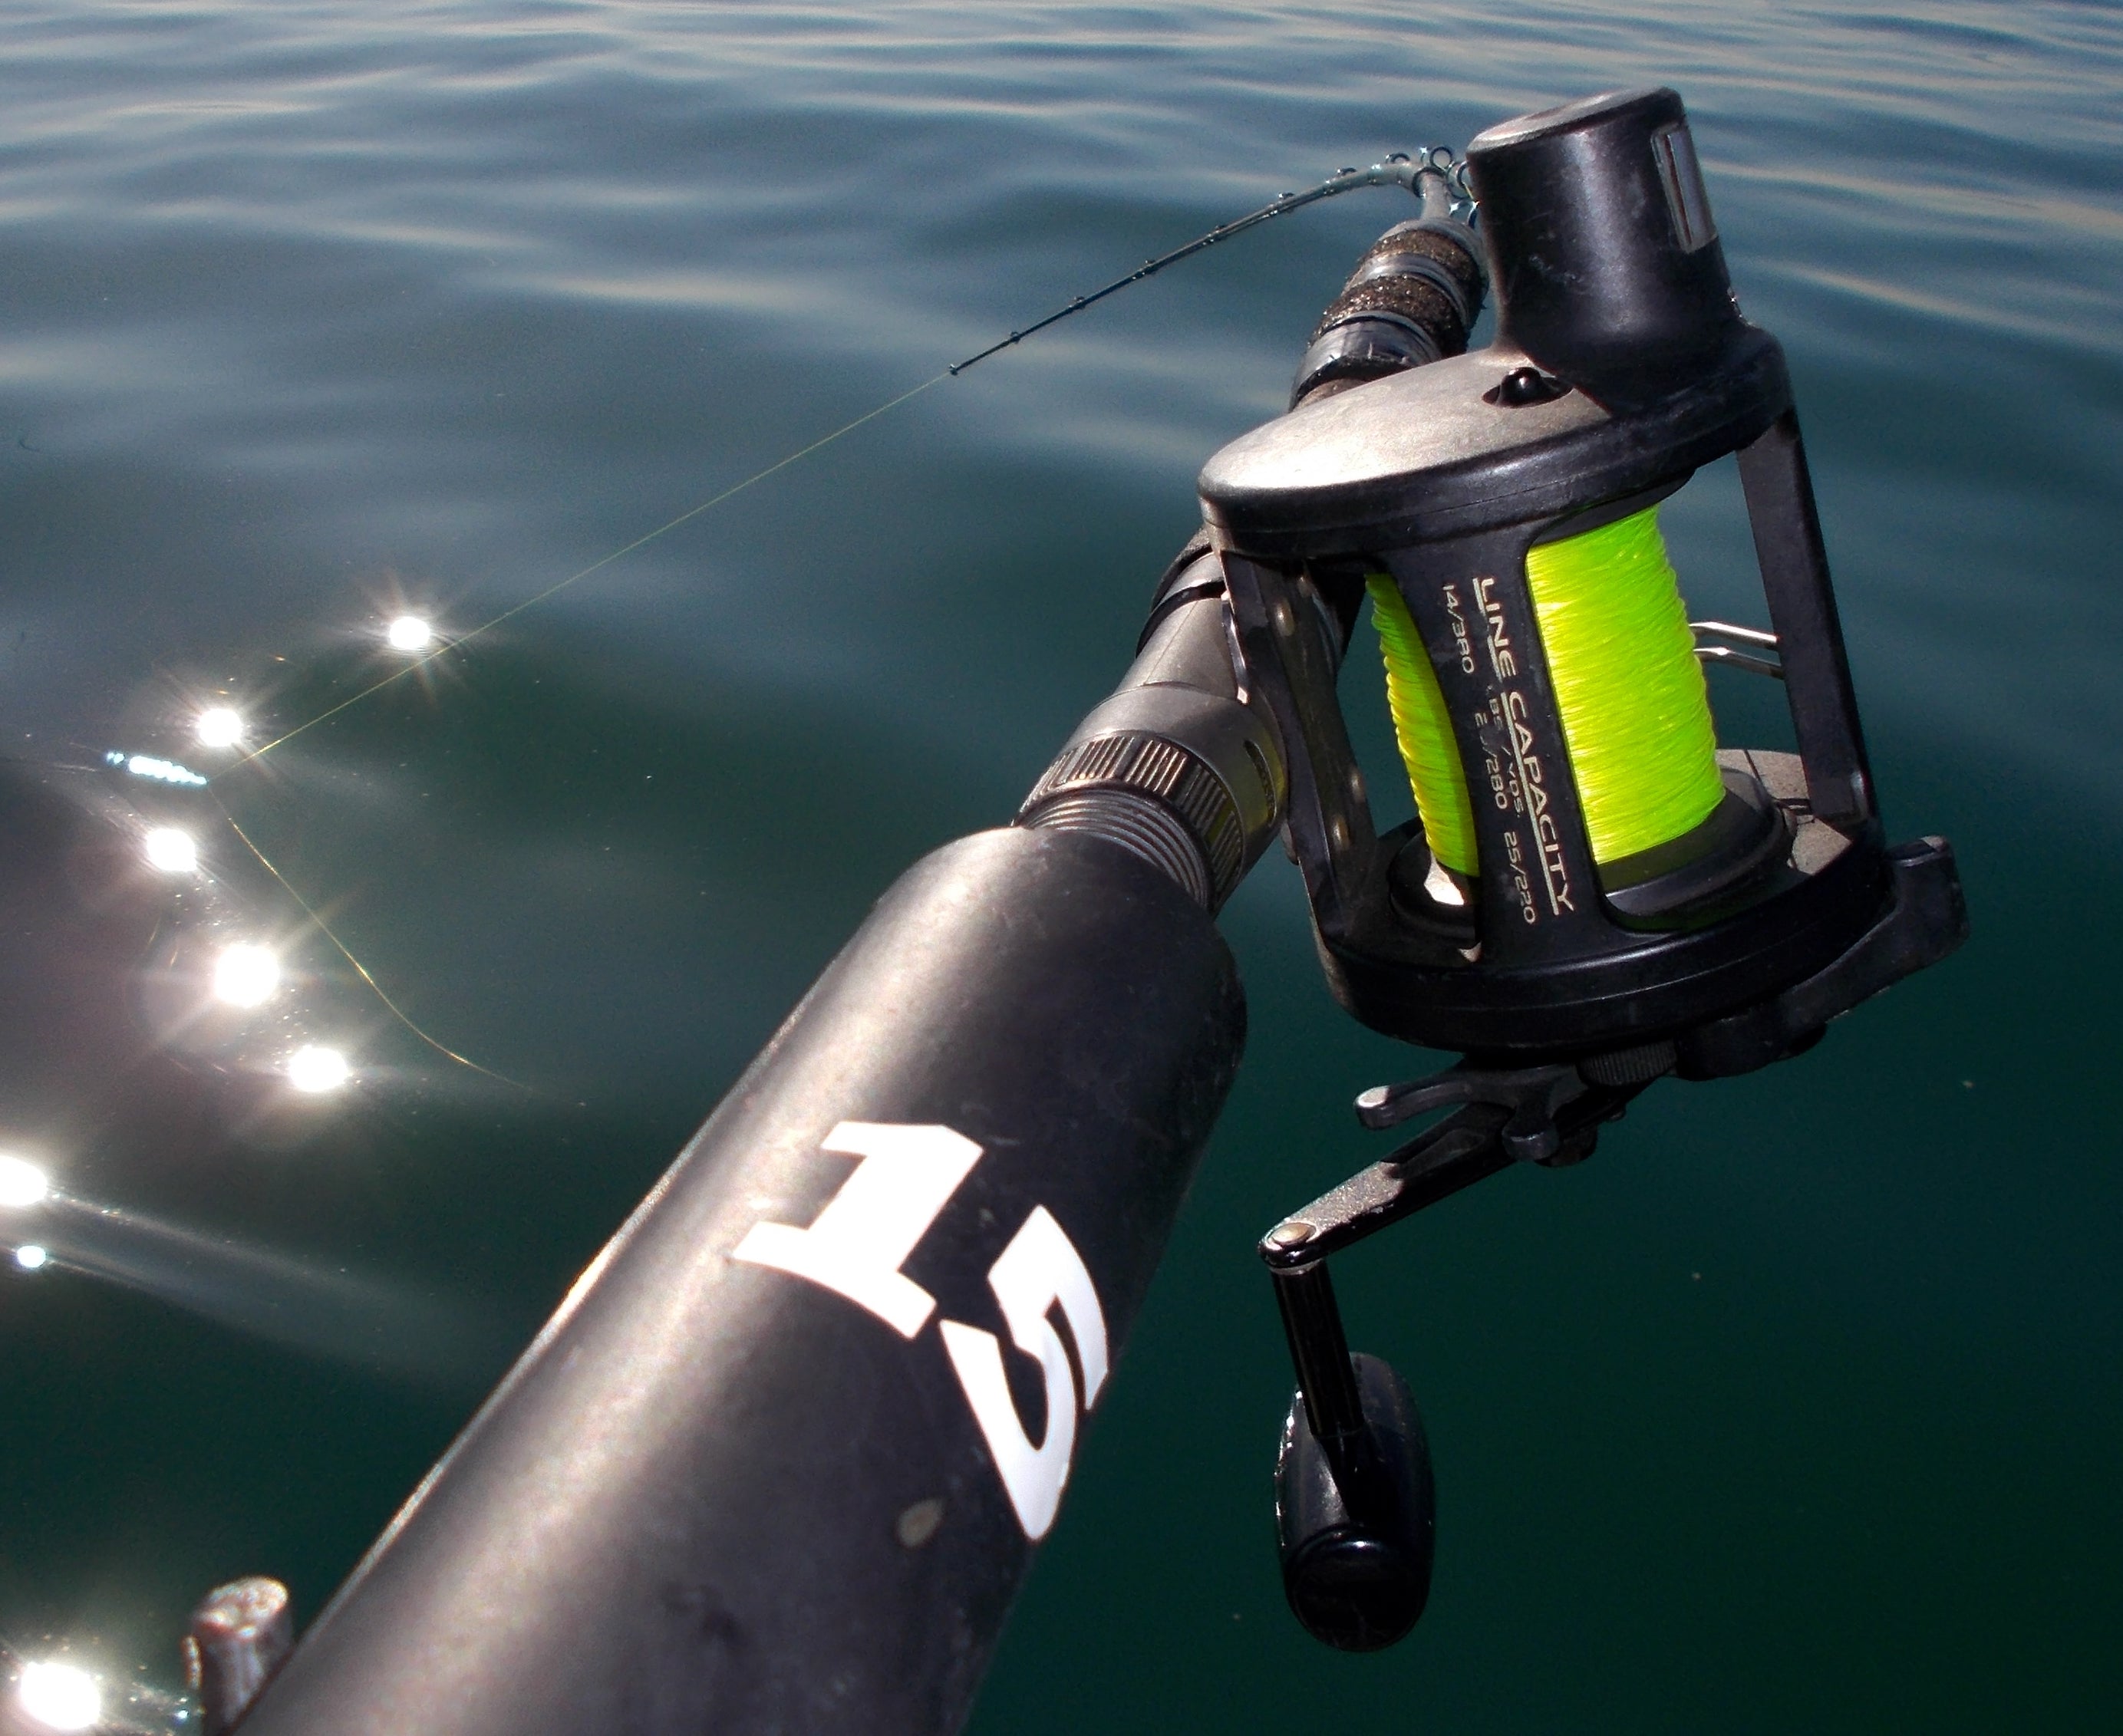 Why to Use Top Notch Tackle for Offshore Fishing